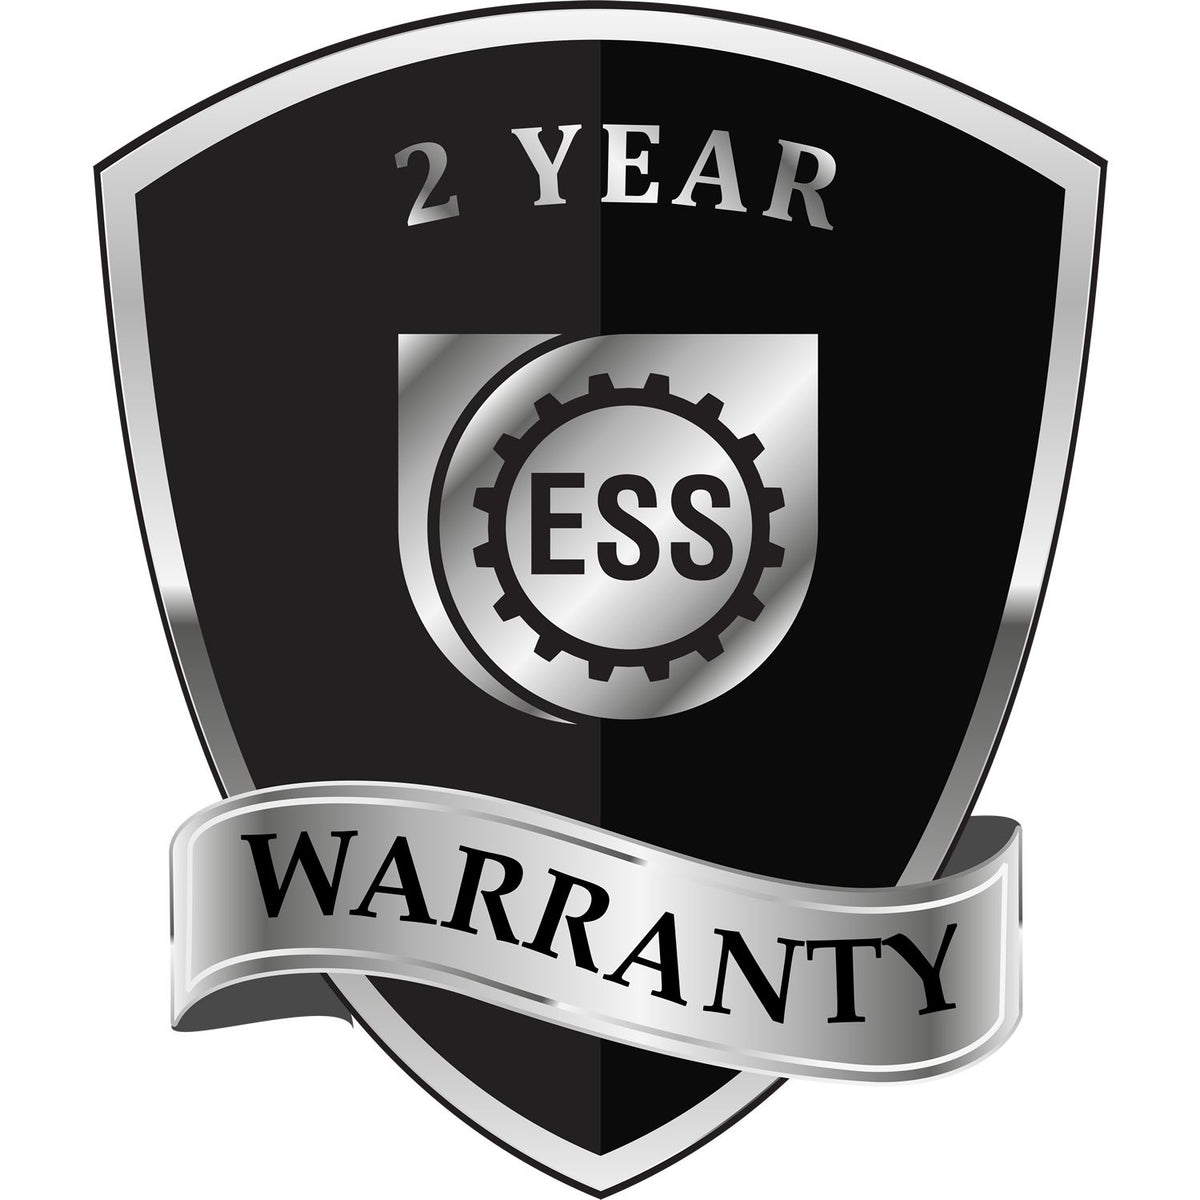 A badge or emblem showing a warranty icon for the Extended Long Reach Maryland Surveyor Embosser